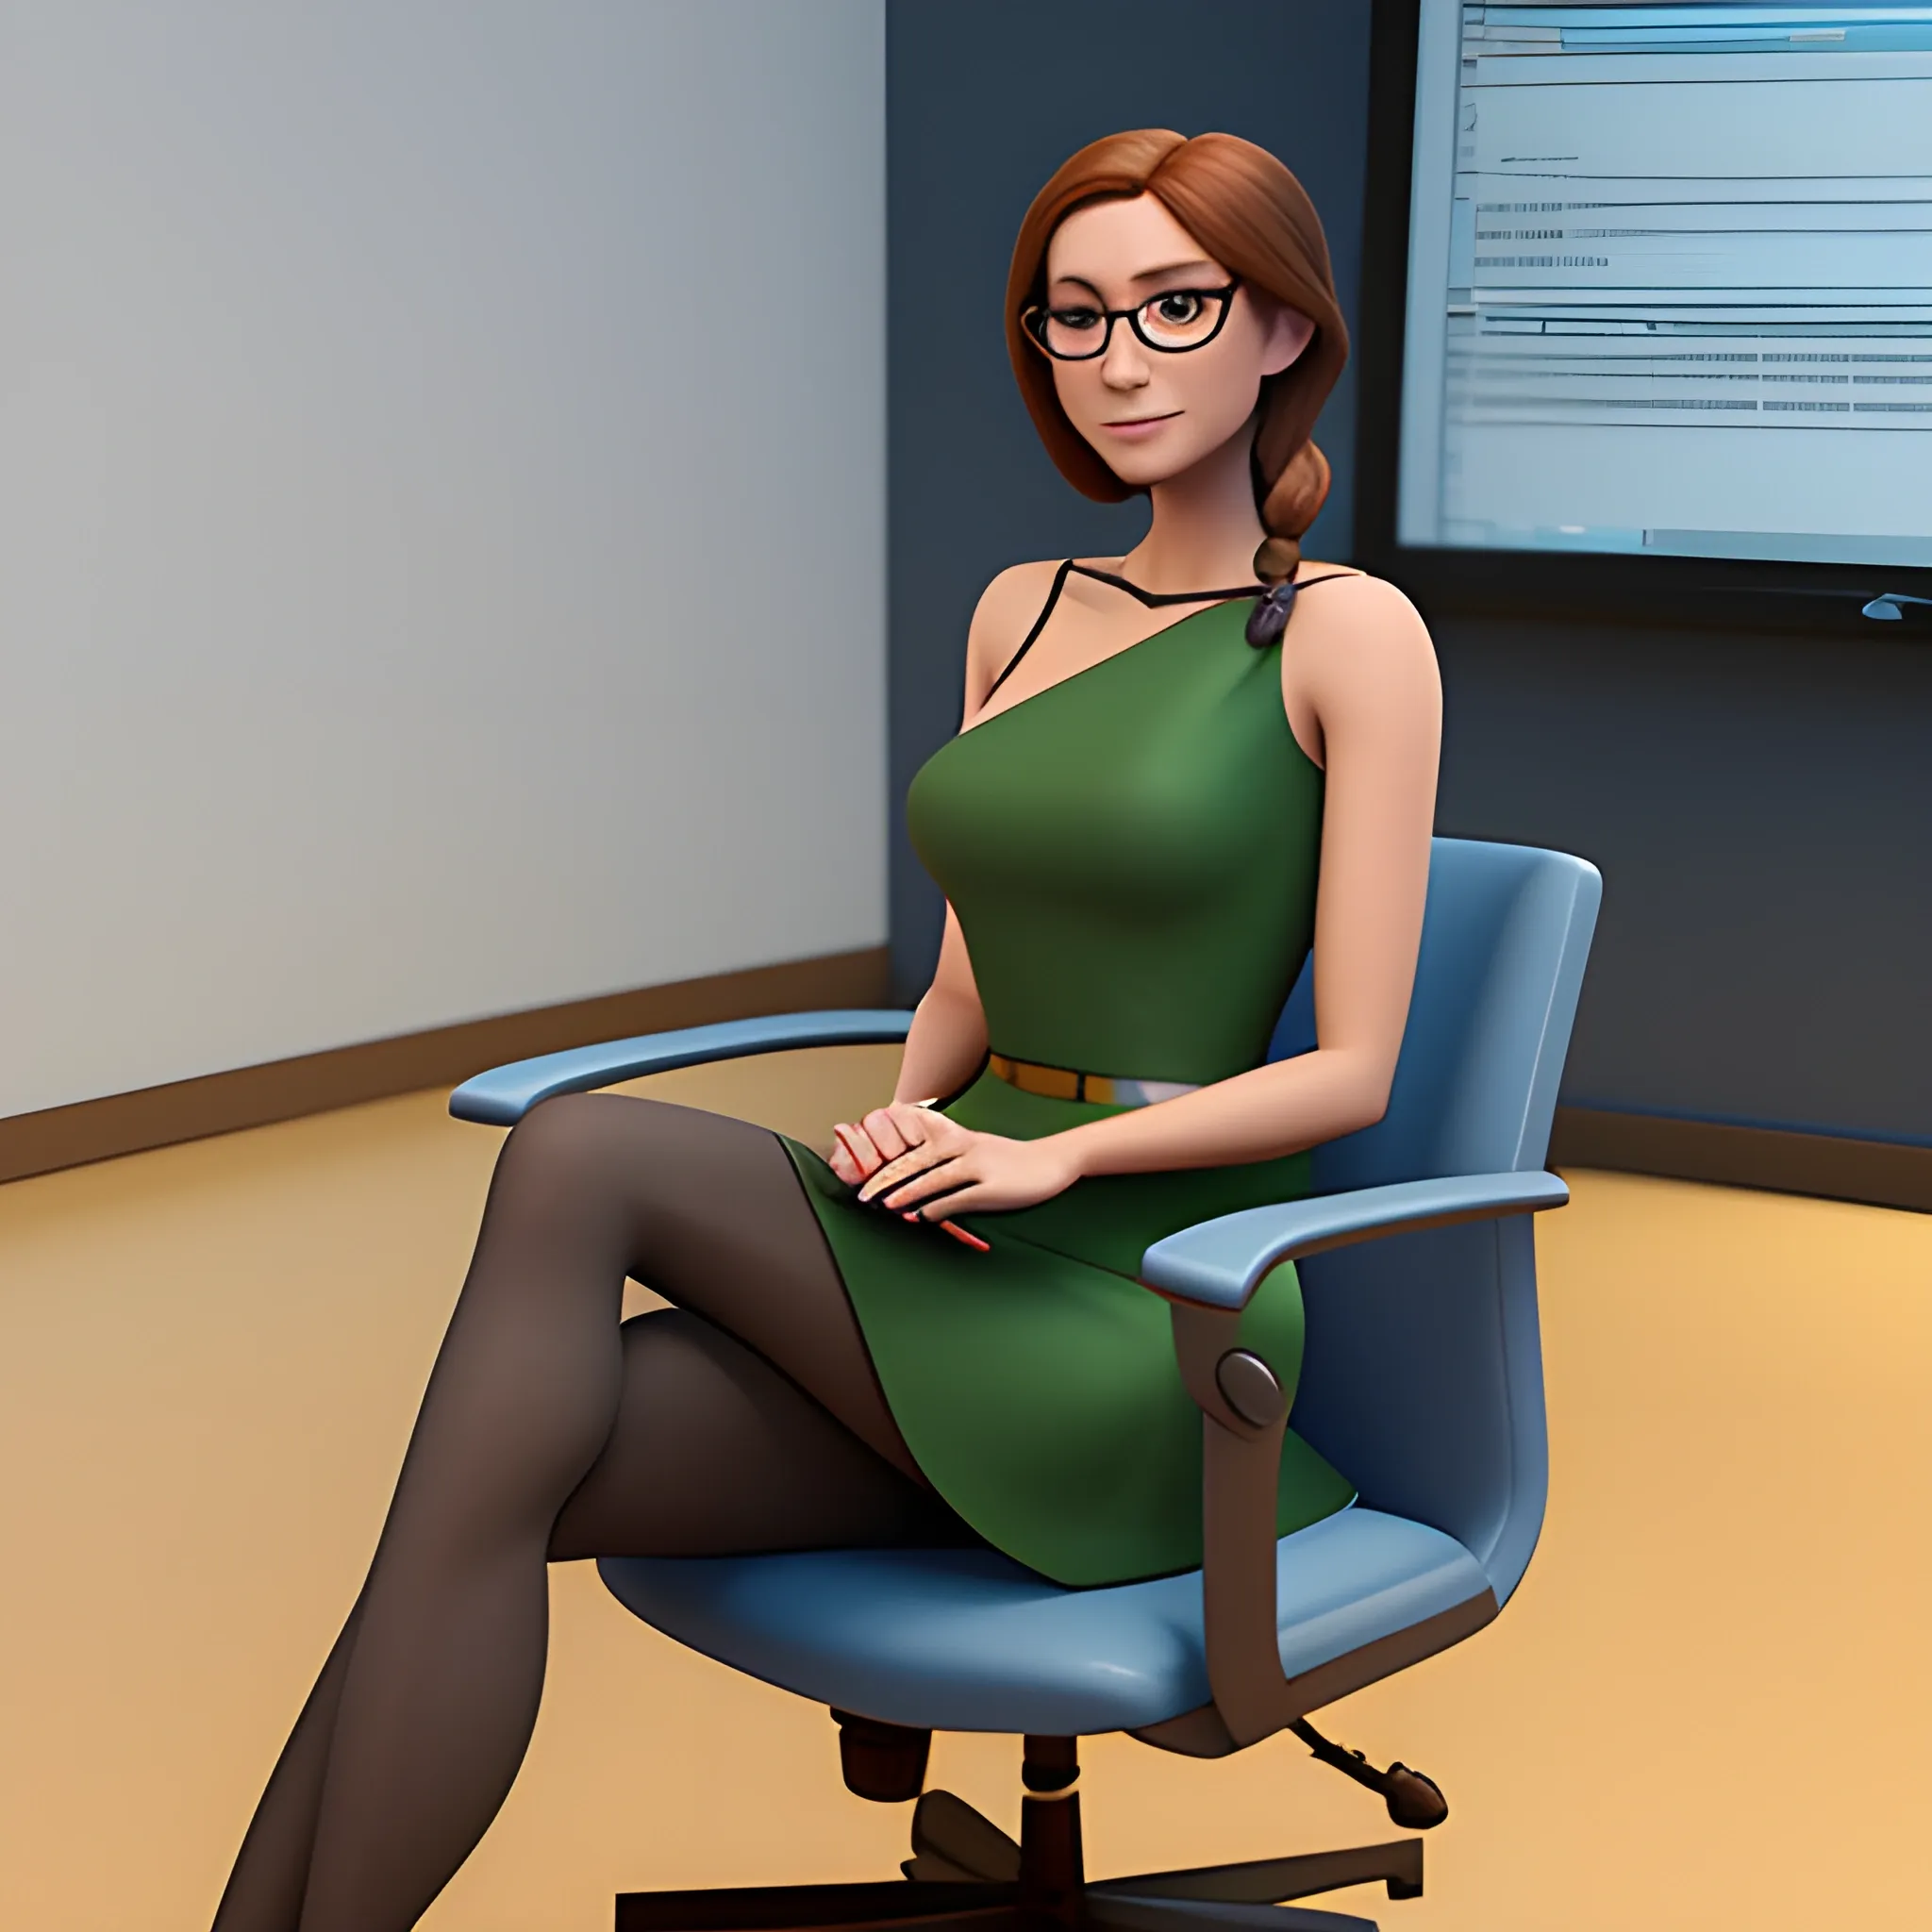 A Disney Pixar Studios character, a woman with shoulder-length hair and glasses, sitting on a chair inside a classroom, 3D rendering